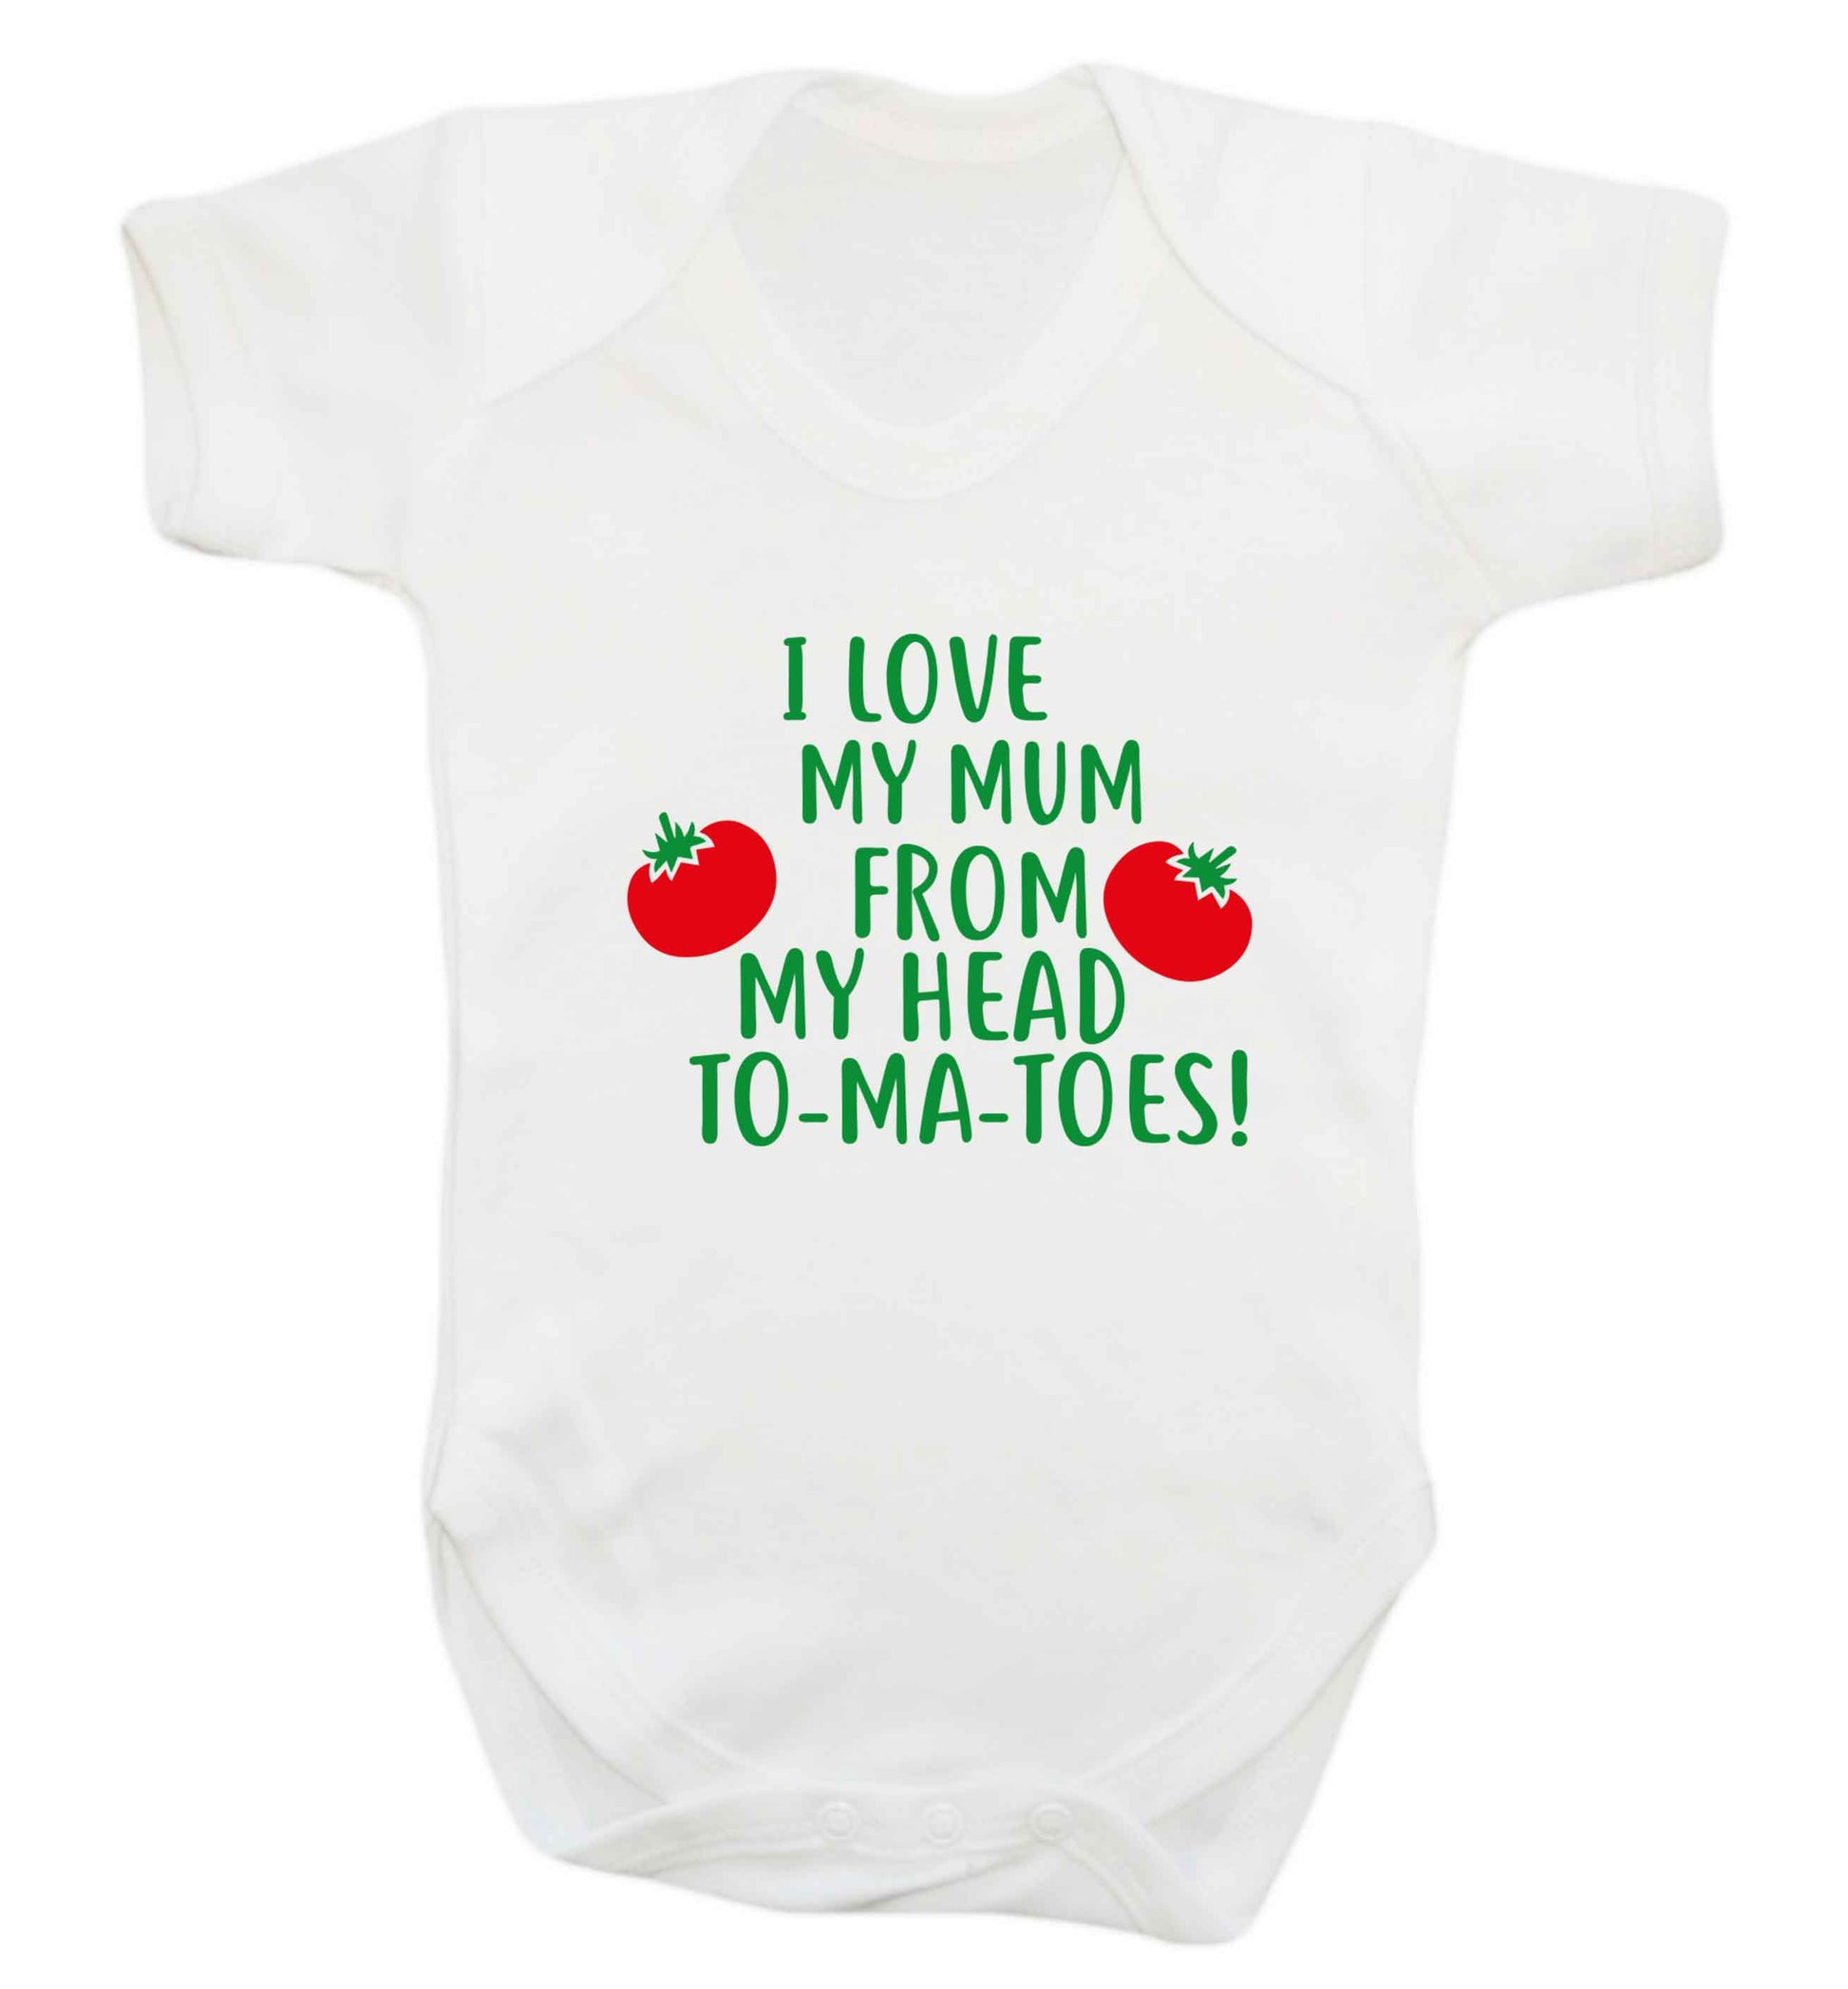 I love my mum from my head to-my-toes! baby vest white 18-24 months